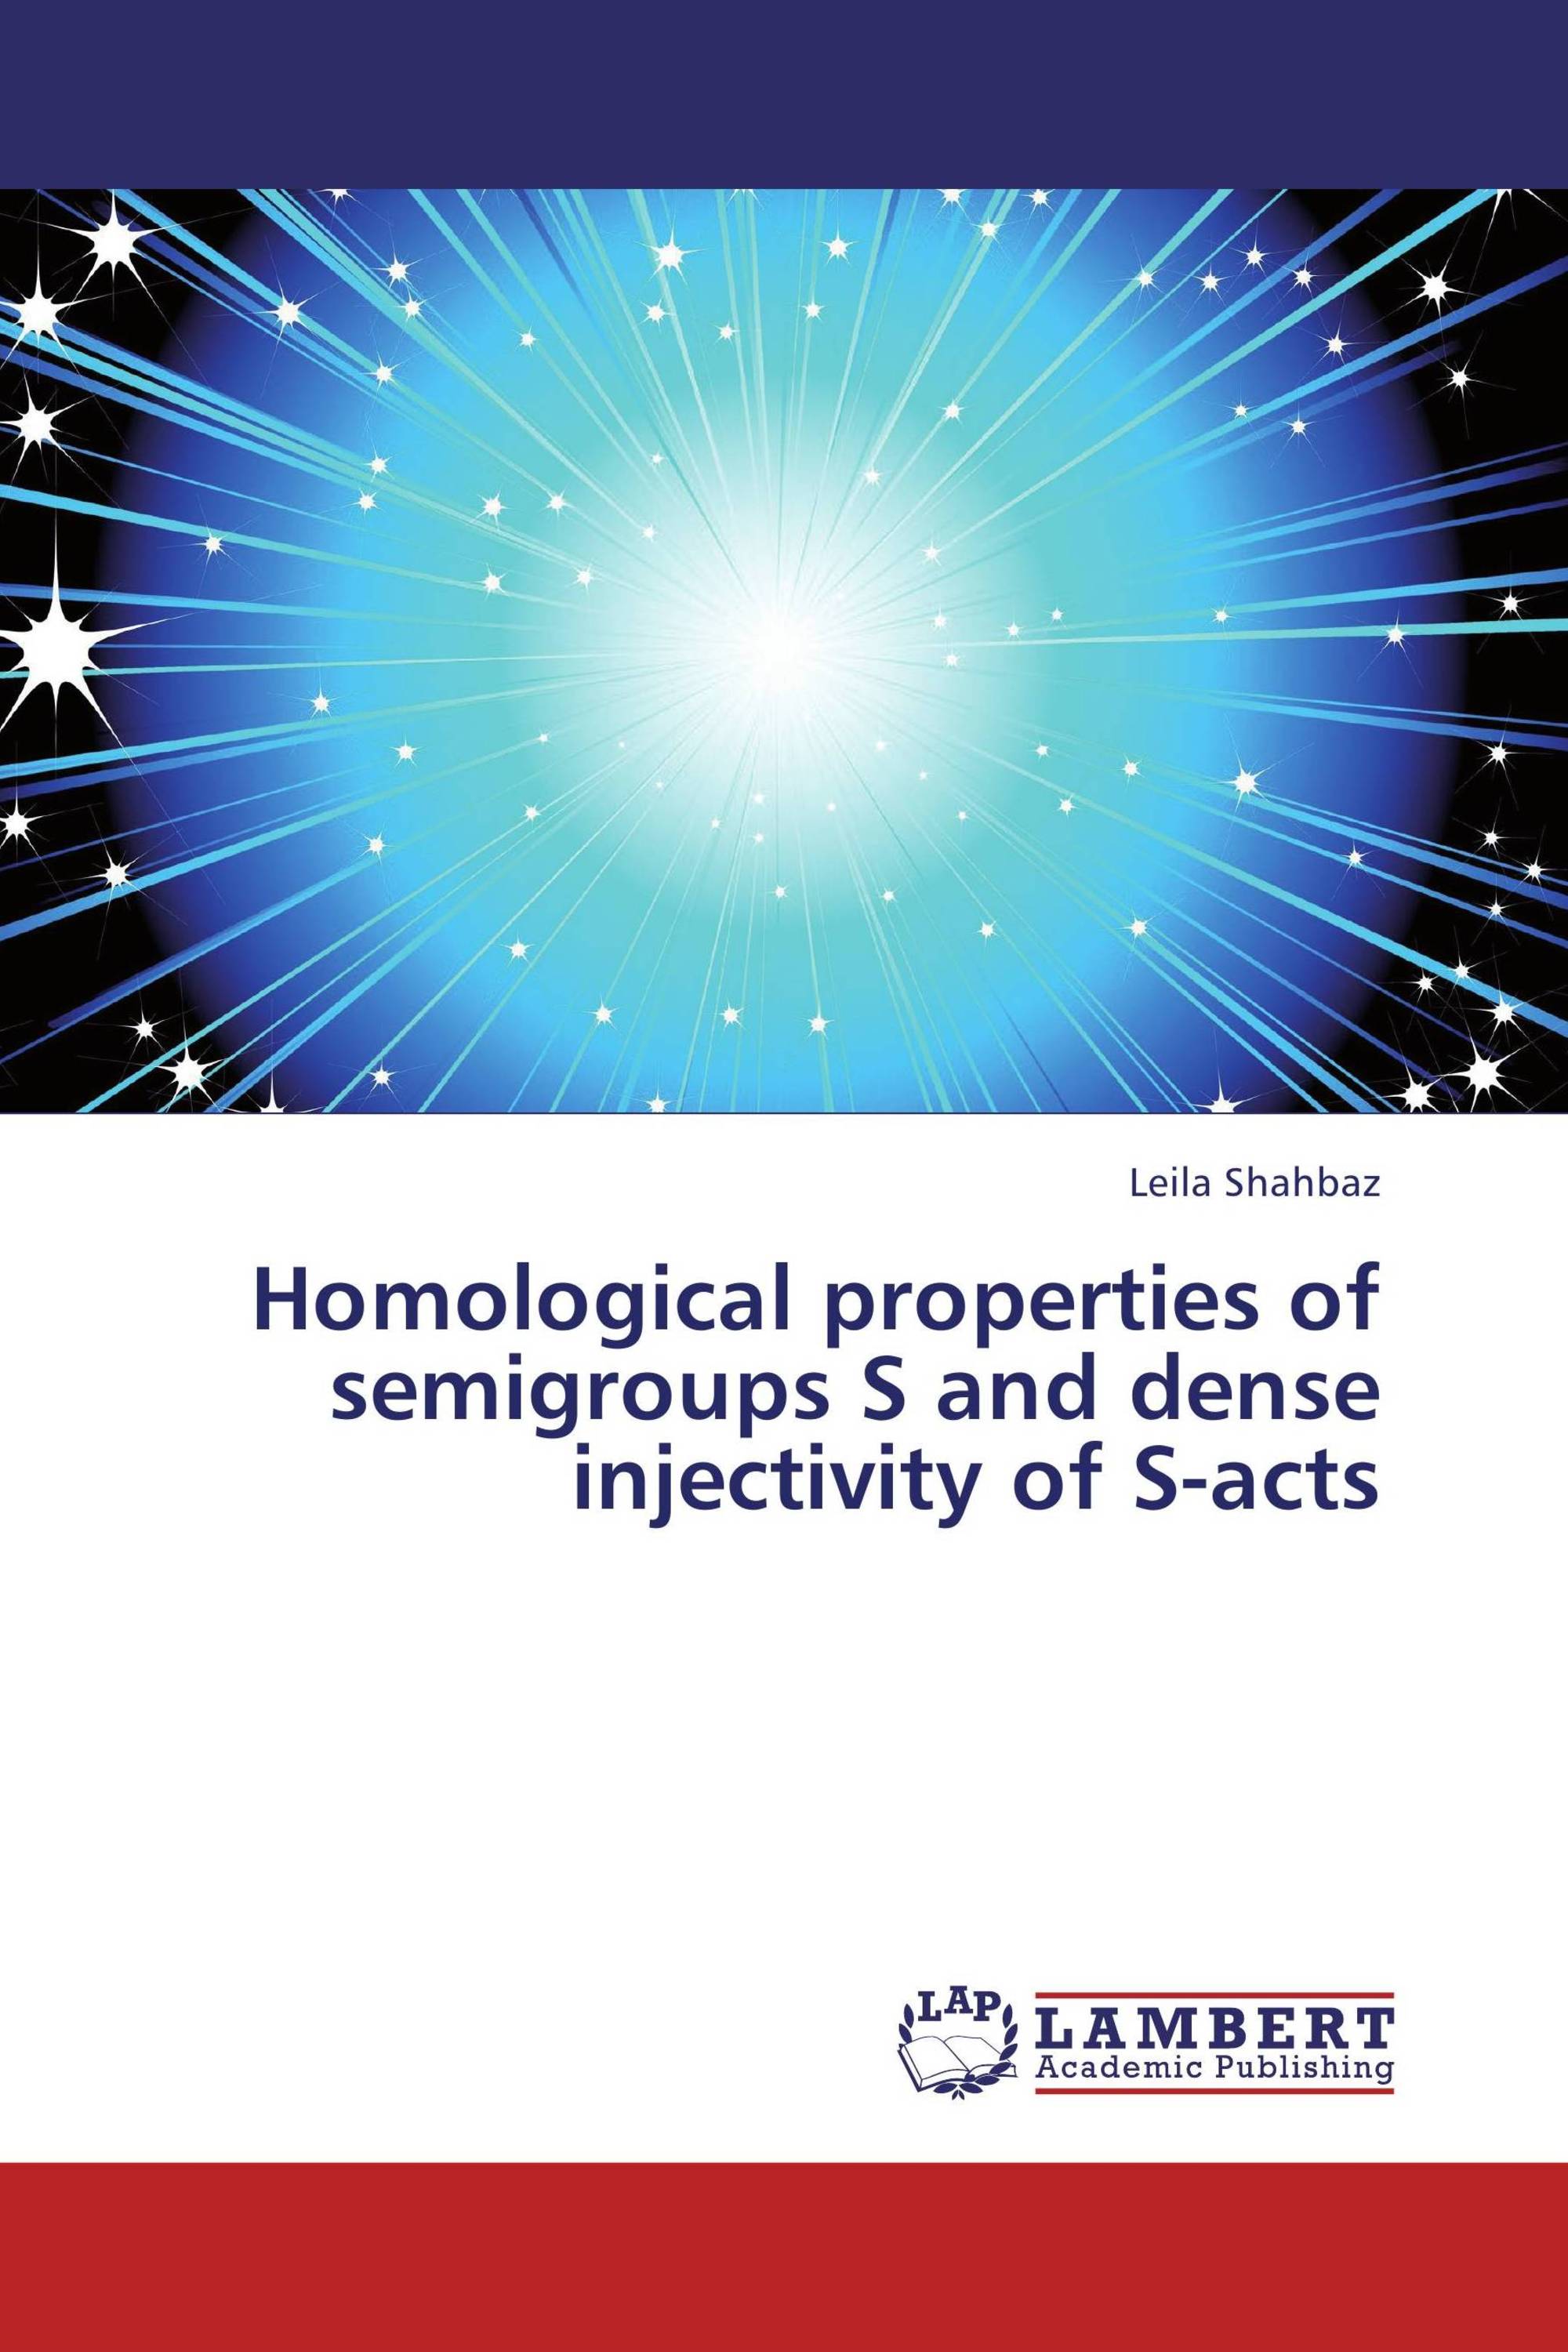 Homological properties of semigroups S and dense injectivity of S-acts